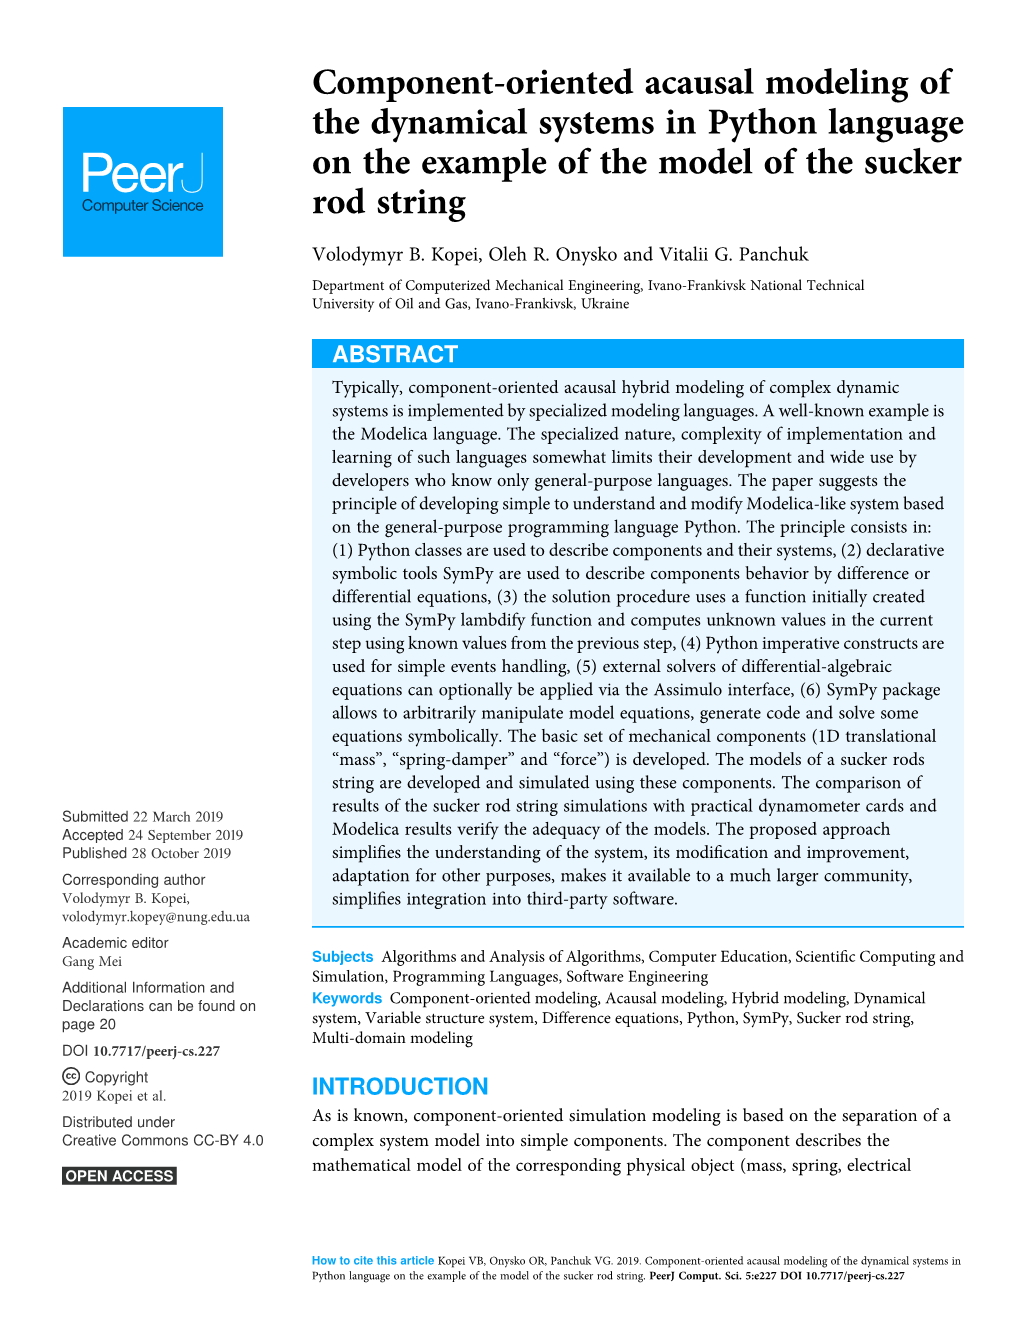 Component-Oriented Acausal Modeling of the Dynamical Systems in Python Language on the Example of the Model of the Sucker Rod String